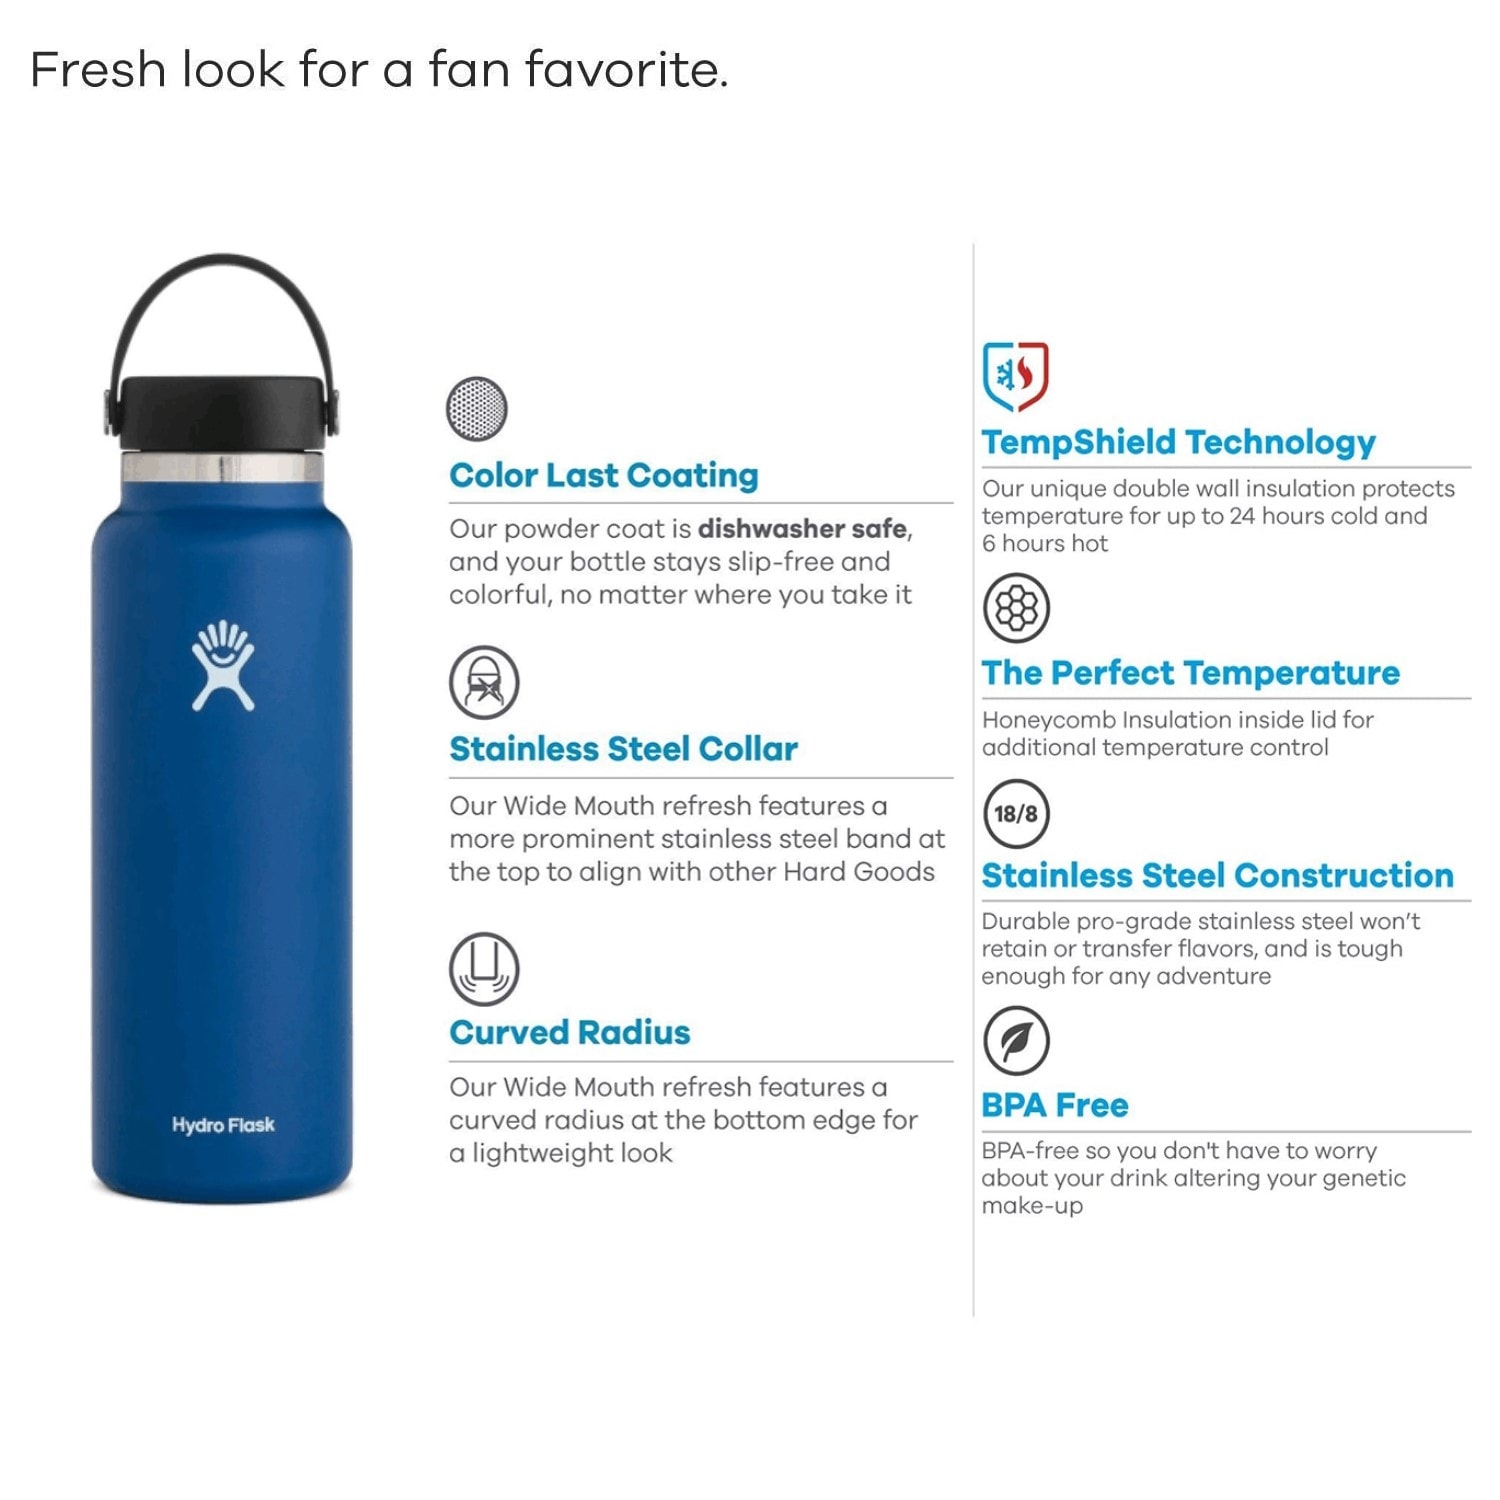 Hydro Flask Wide Mouth 40 oz. Bottle - New Style